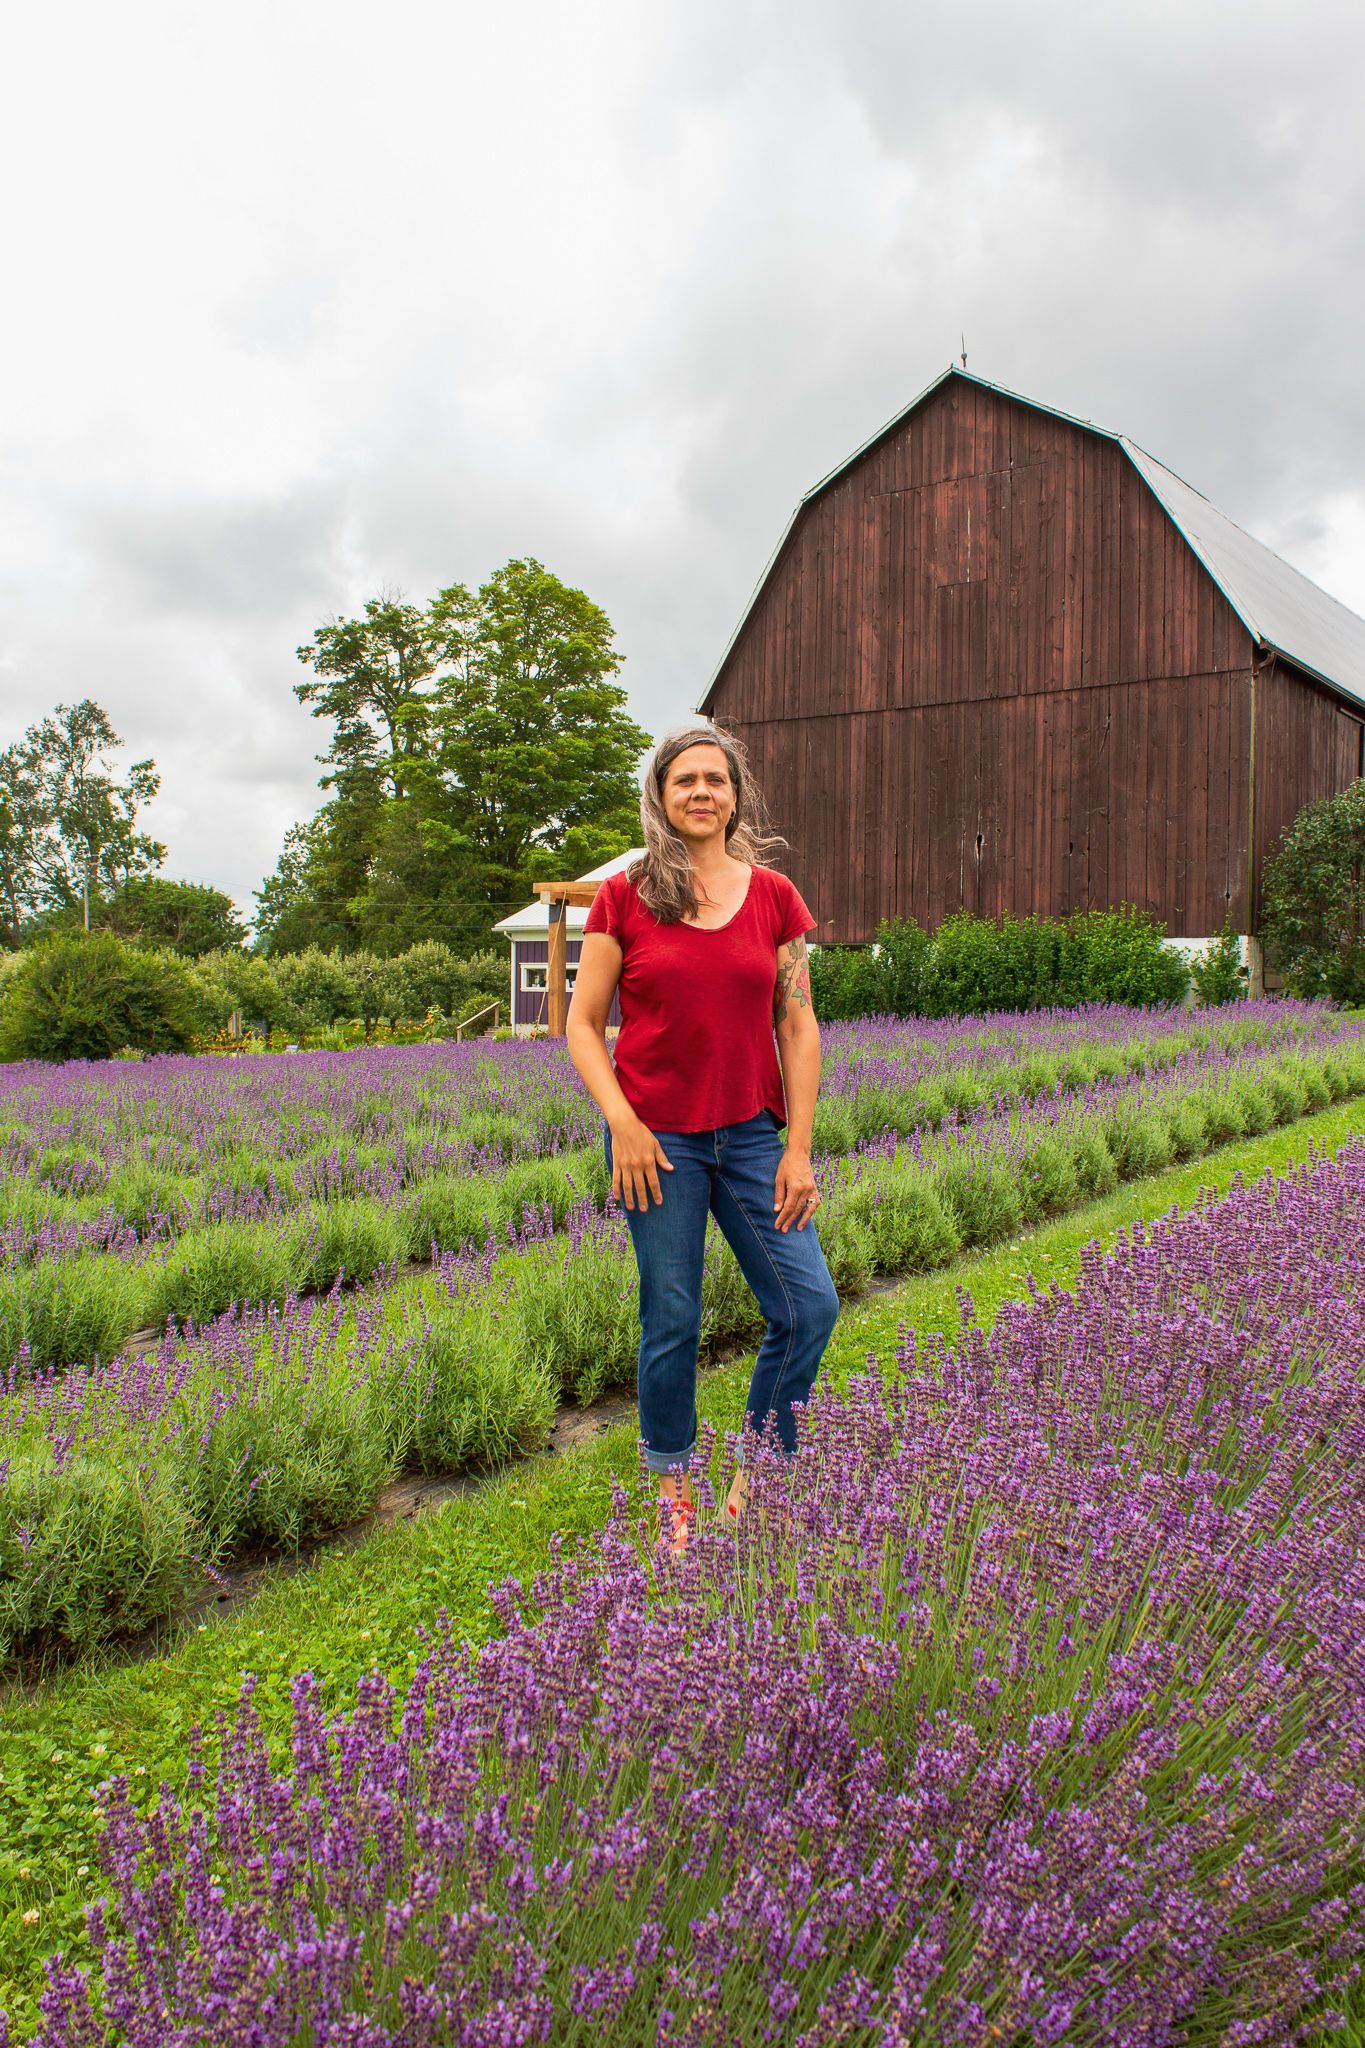 Home on the Farm: How One Potter's Return to Her Roots Allowed Her Business to Blossom